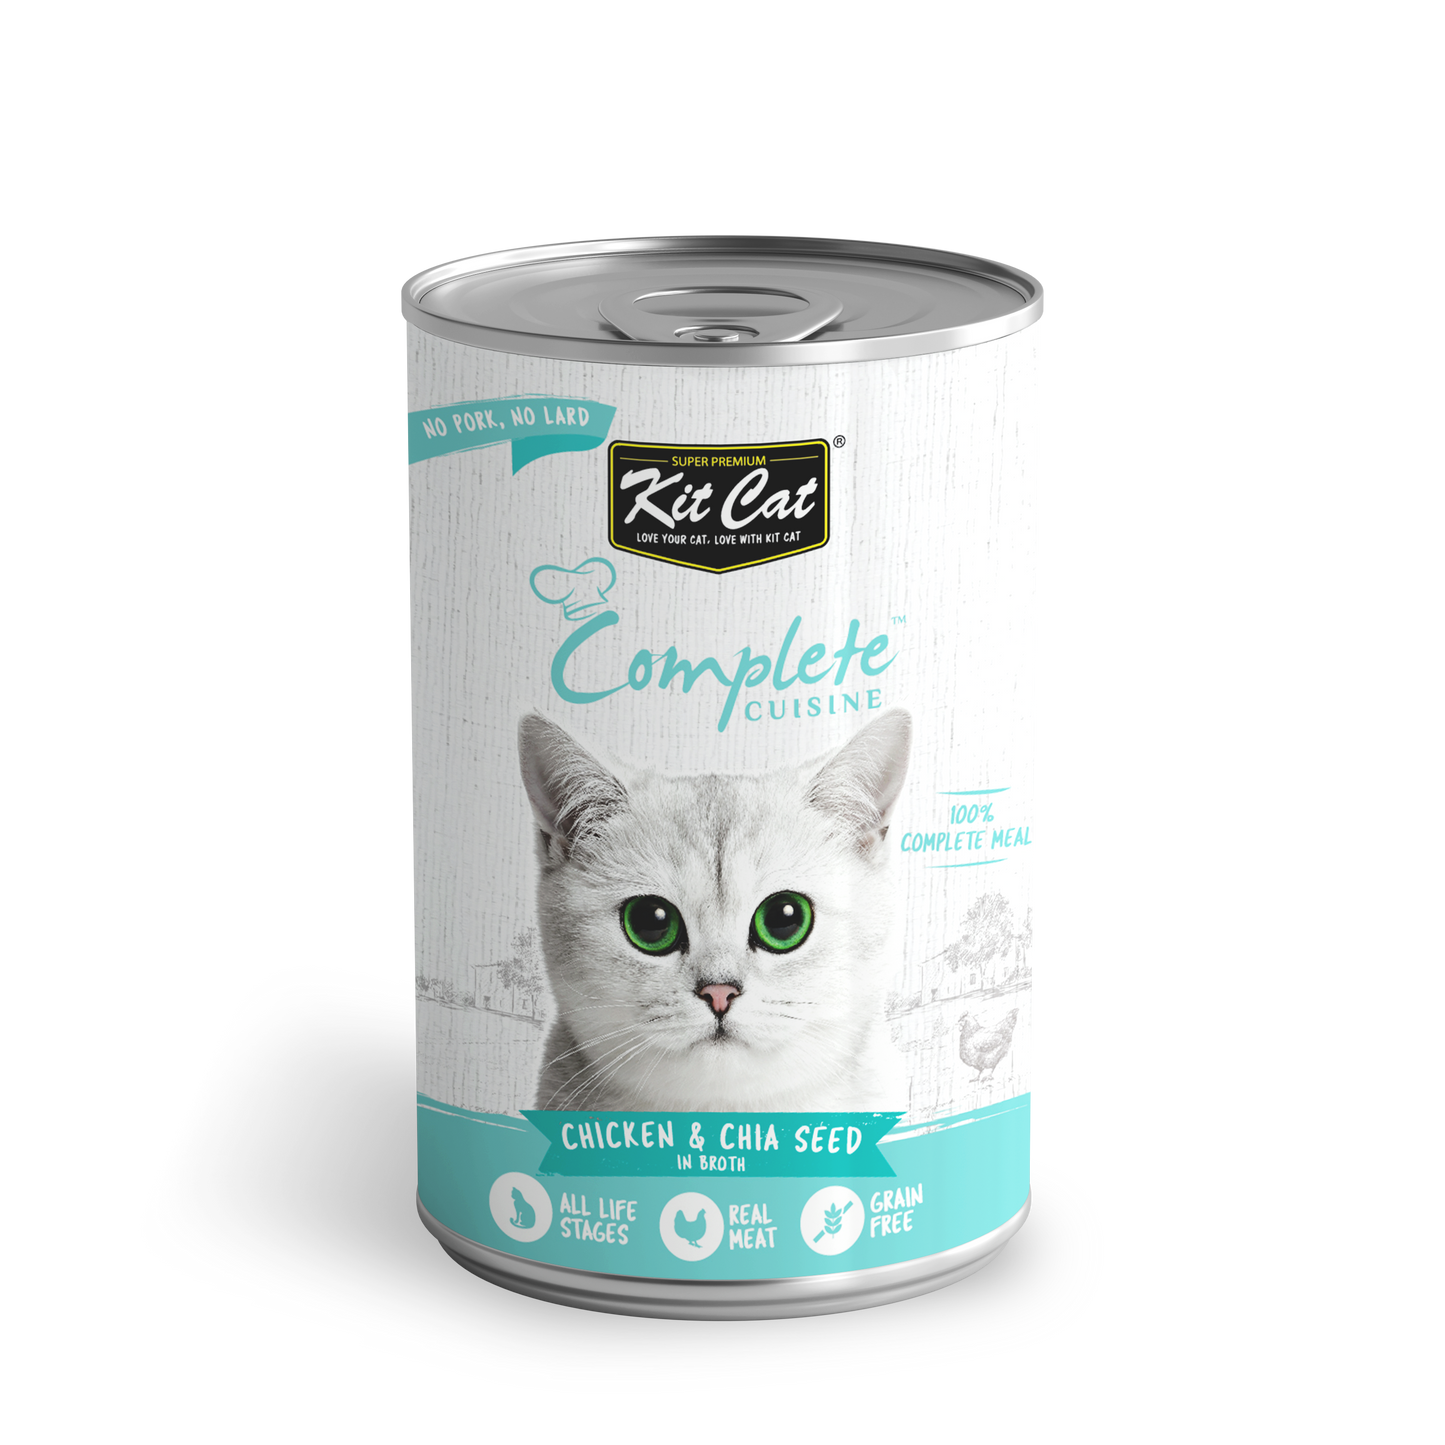 Kit Cat Complete Cuisine Chicken & Chia Seed in Broth Grain-Free Canned Cat Food 150g